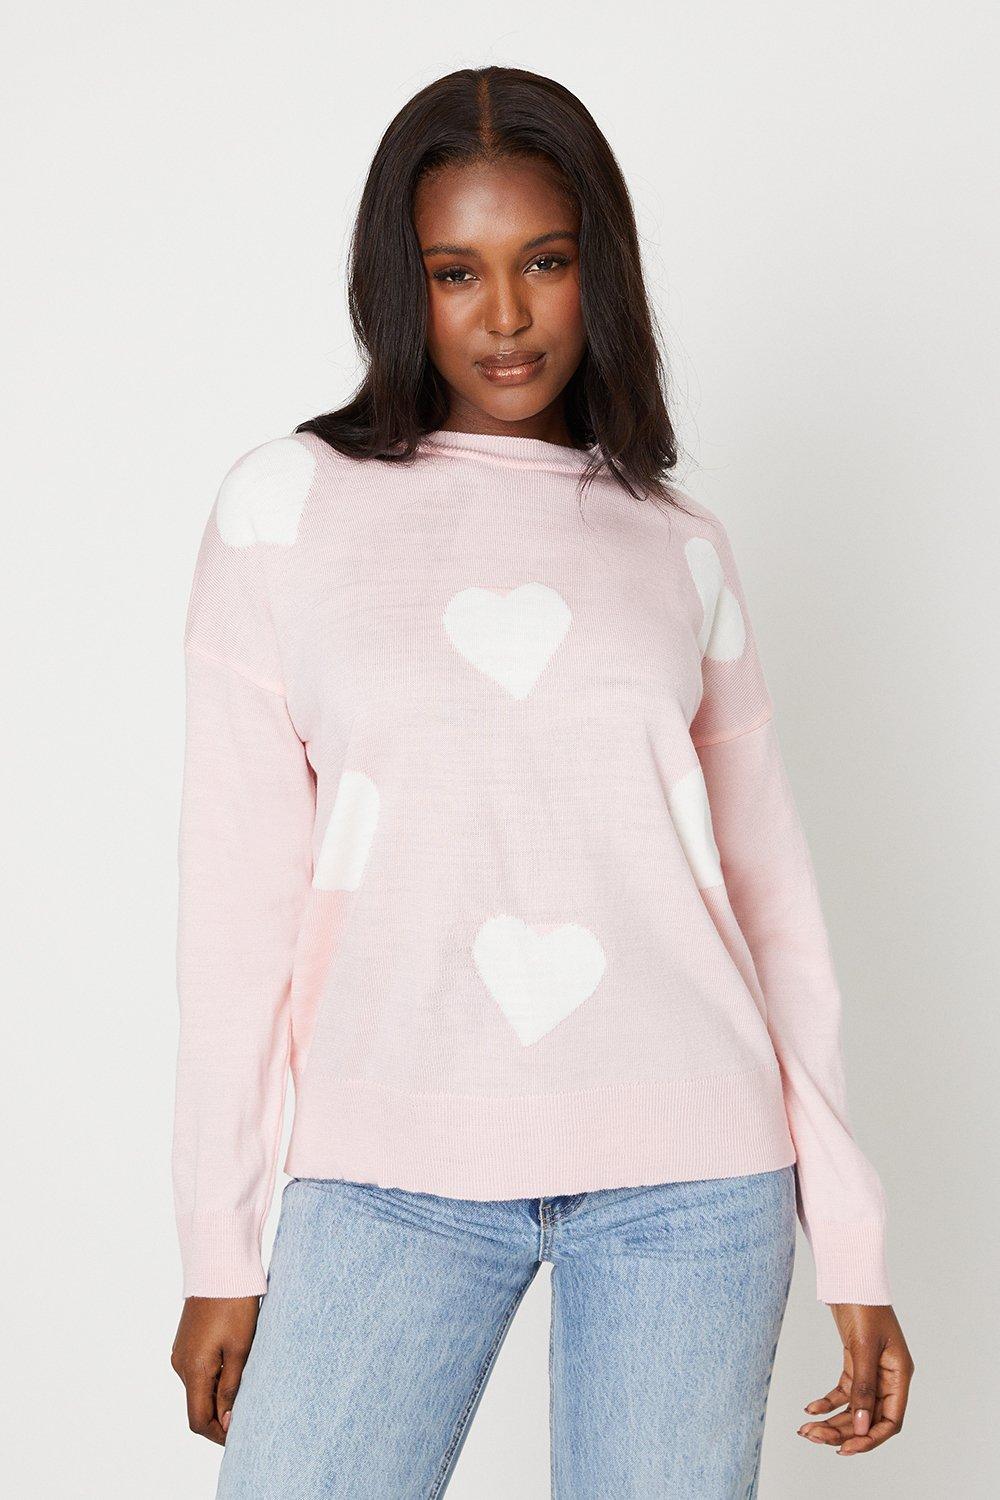 Women's Crew Neck All Over Heart Print Knitted Jumper - blush - L